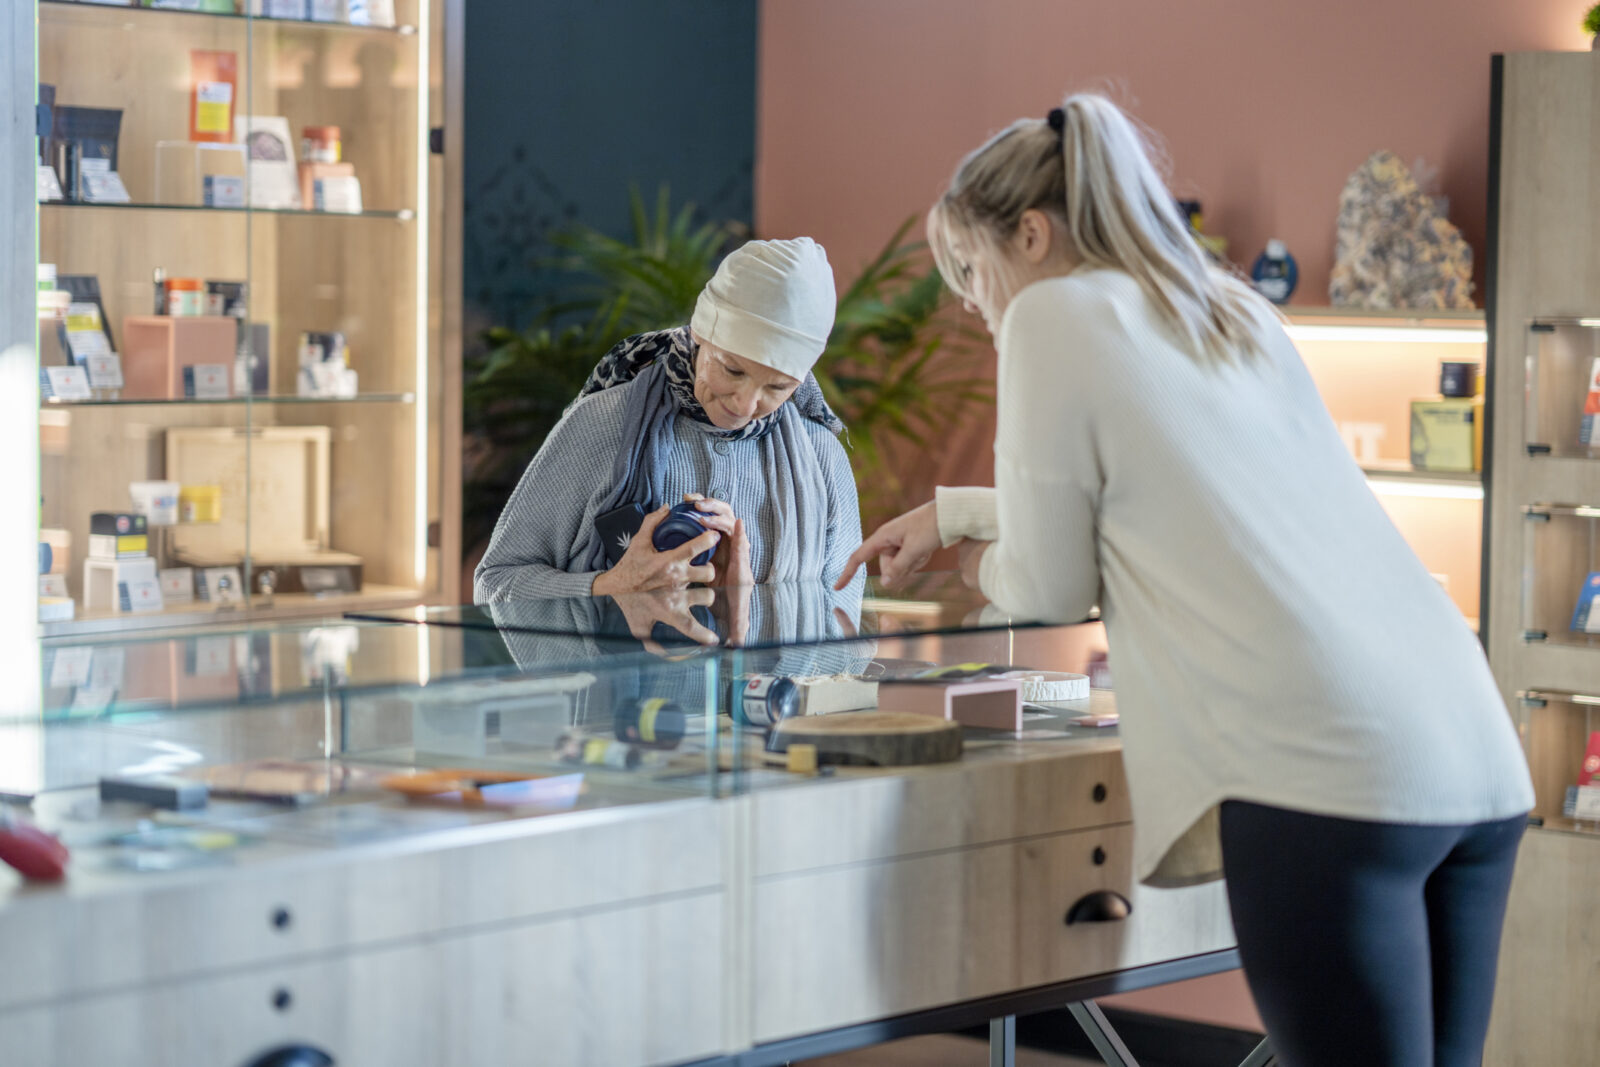 A senior woman is seen behind the counter of a legal cannabis retailer as she shops for product.